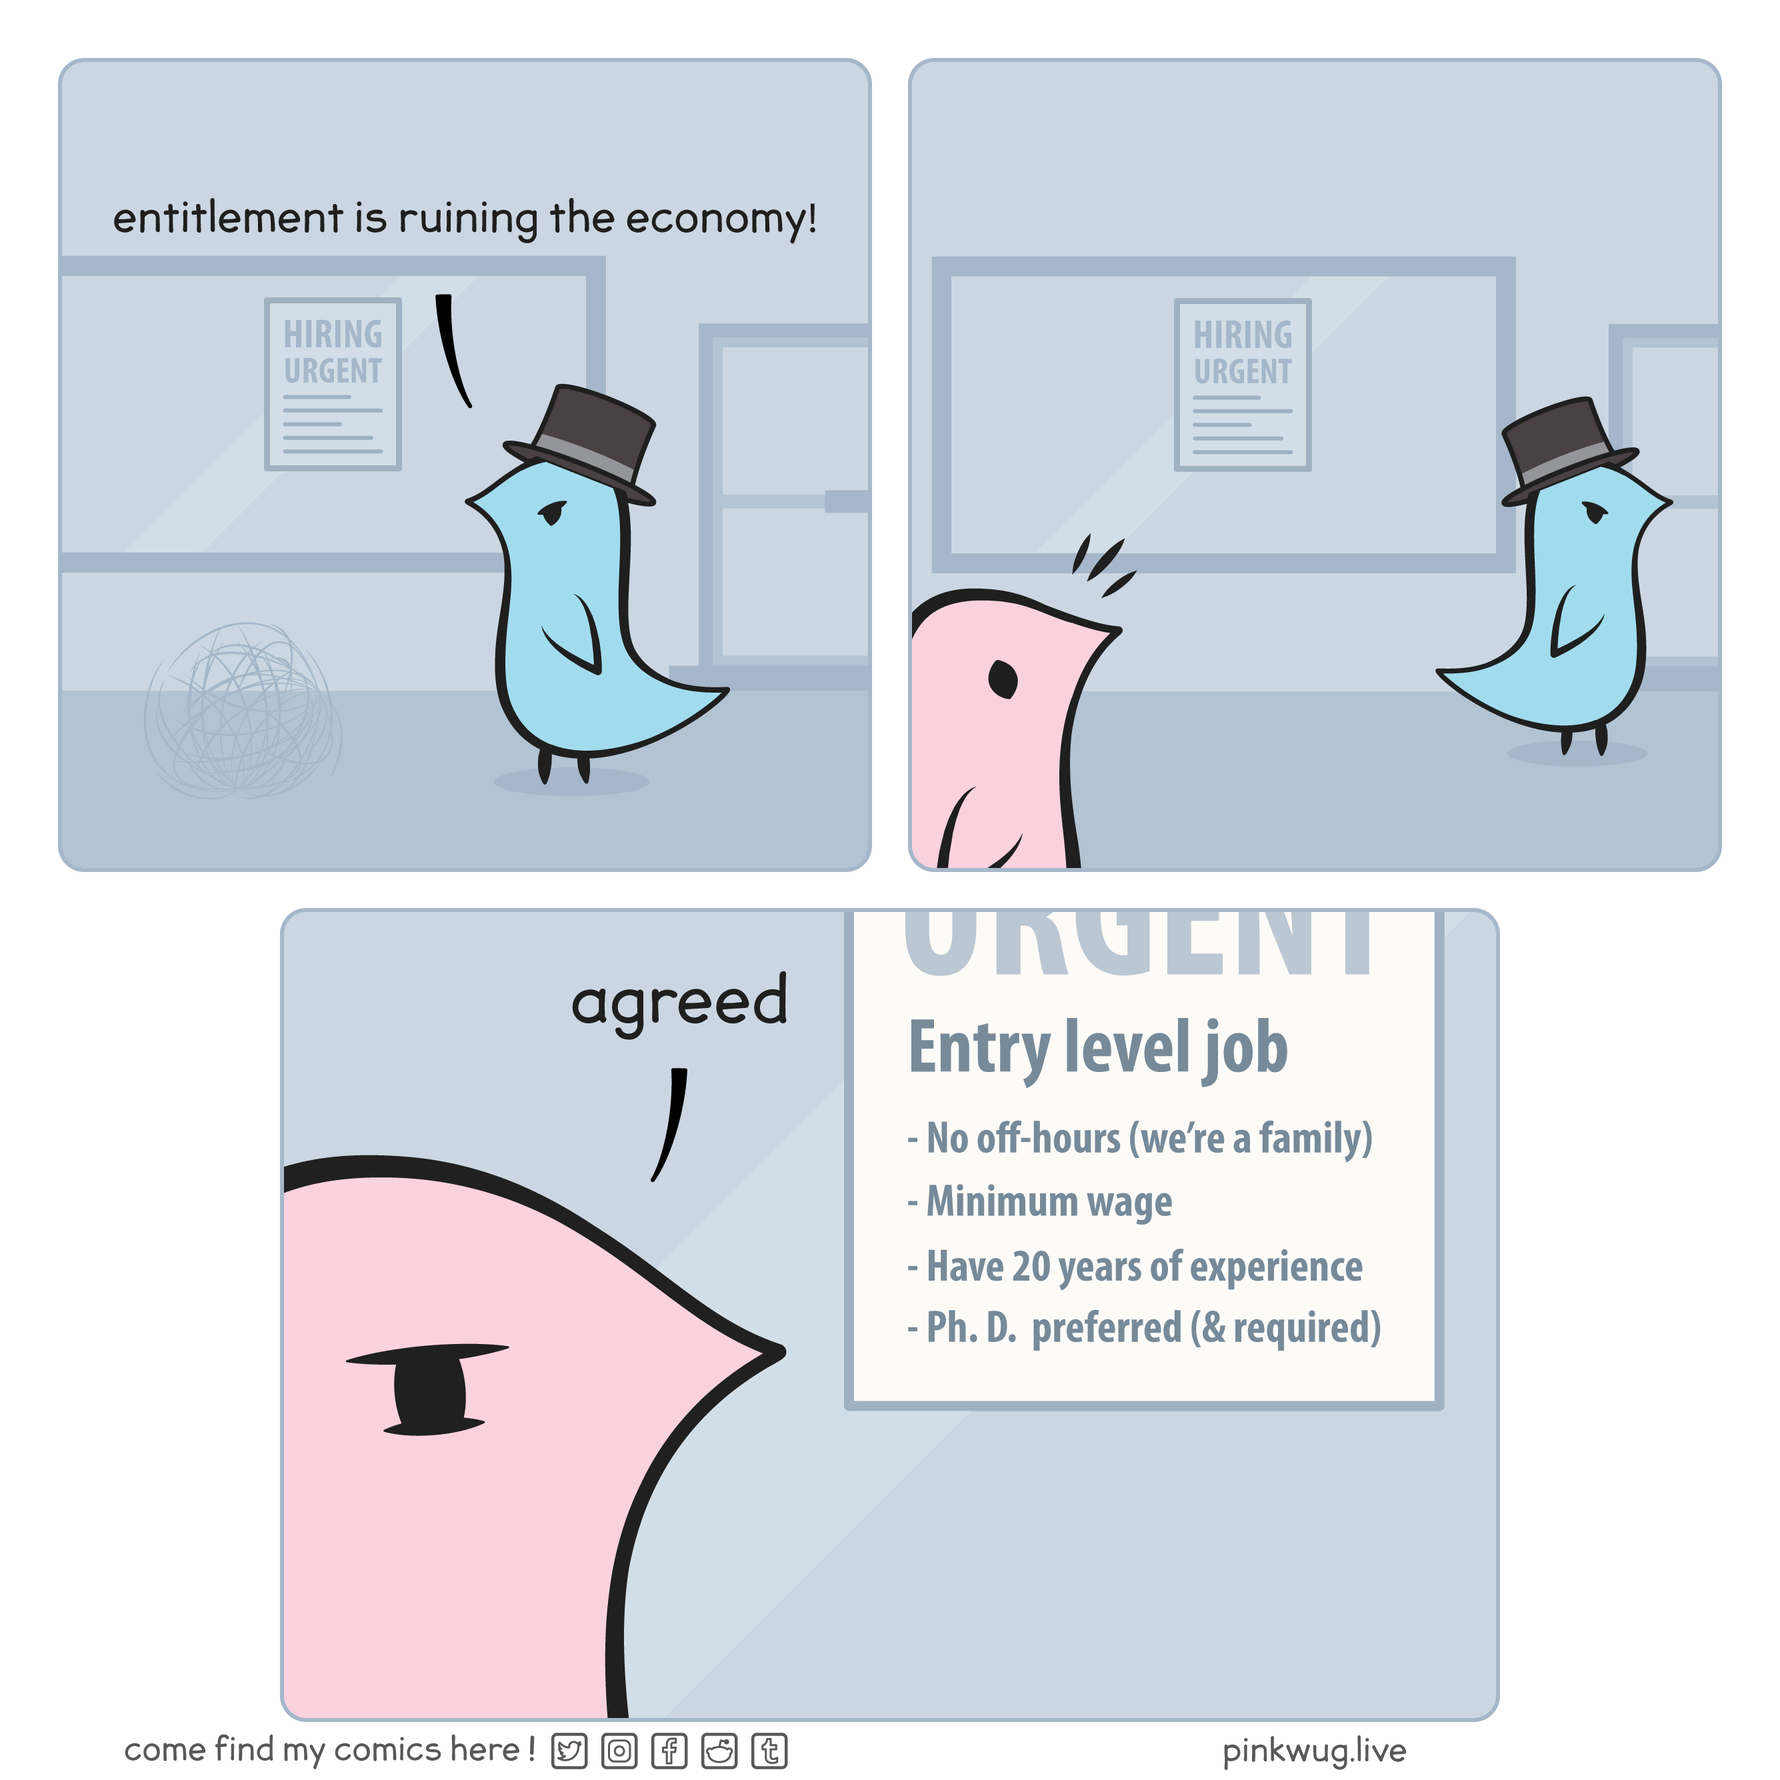 pinkwug comic: Panel 1:
Blue wug with top hat outside of his business saying: "entitlement is ruining the economy!"

Panel 2:
Bblue wug turning away and pink wug noticing a job opening poster.

Panel 3:
Poster says: Entry level job: -No off-hours (we're a family), -Minimum wage, -Have 20 years of experience, -Ph. D. preferred (&required)
Pink wug saying : "agreed"